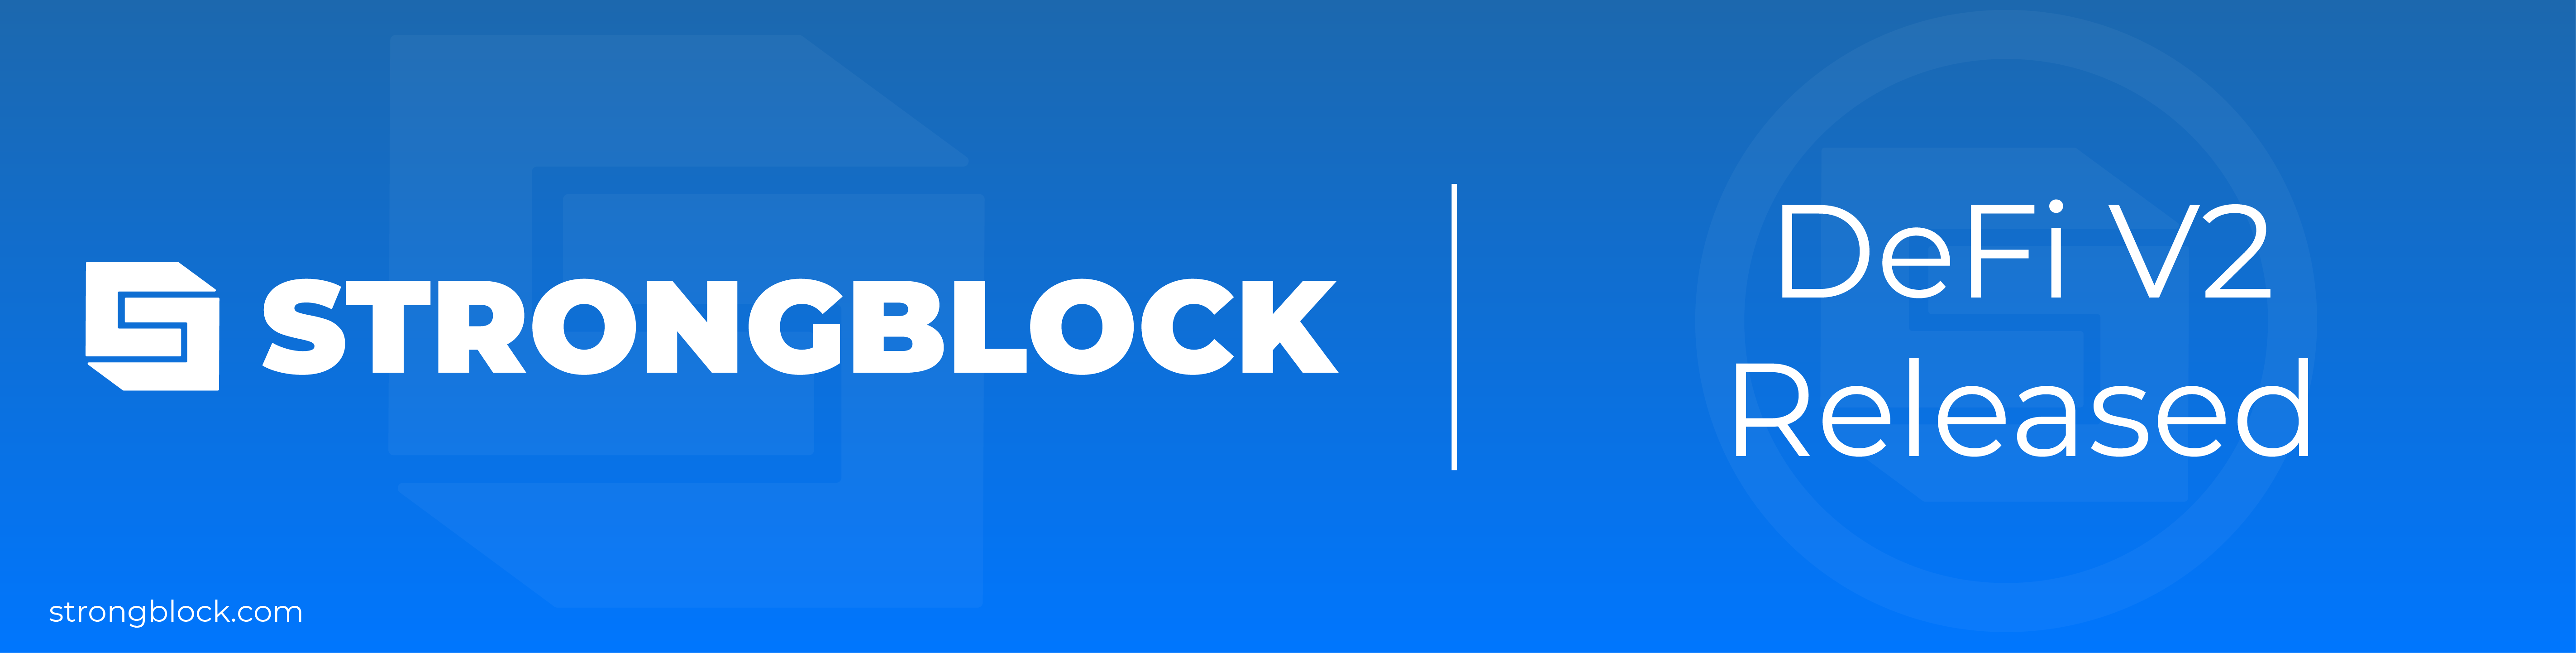 StrongBlock DeFi V2 Released. We are pleased to announce ...